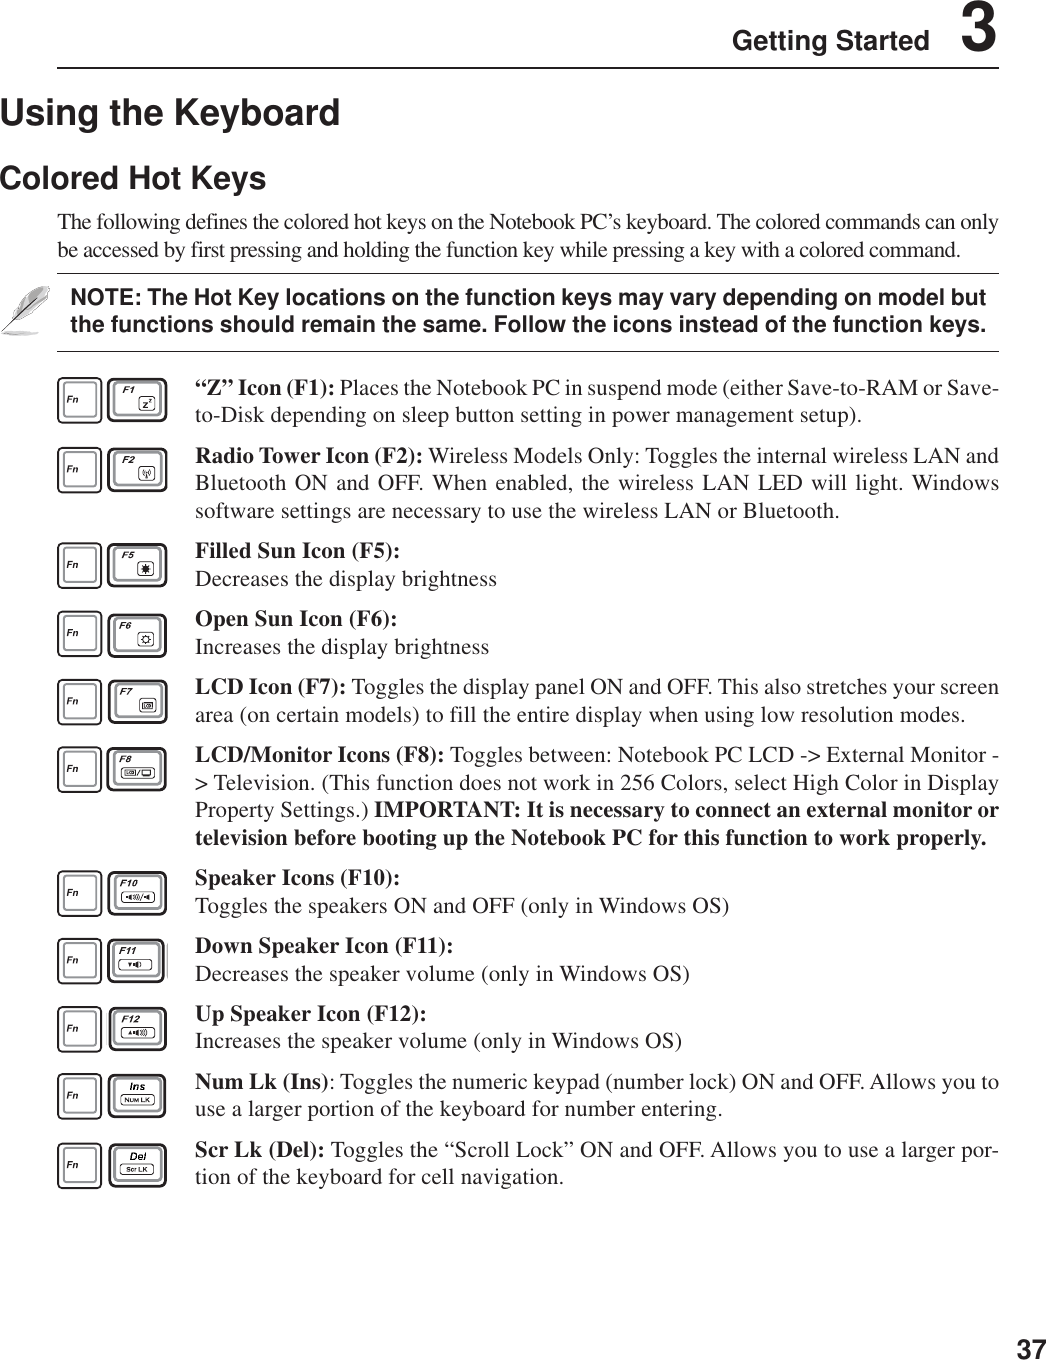 37Getting Started    3Using the KeyboardColored Hot KeysThe following defines the colored hot keys on the Notebook PC’s keyboard. The colored commands can onlybe accessed by first pressing and holding the function key while pressing a key with a colored command.NOTE: The Hot Key locations on the function keys may vary depending on model butthe functions should remain the same. Follow the icons instead of the function keys.“Z” Icon (F1): Places the Notebook PC in suspend mode (either Save-to-RAM or Save-to-Disk depending on sleep button setting in power management setup).Radio Tower Icon (F2): Wireless Models Only: Toggles the internal wireless LAN andBluetooth ON and OFF. When enabled, the wireless LAN LED will light. Windowssoftware settings are necessary to use the wireless LAN or Bluetooth.Filled Sun Icon (F5):Decreases the display brightnessOpen Sun Icon (F6):Increases the display brightnessLCD Icon (F7): Toggles the display panel ON and OFF. This also stretches your screenarea (on certain models) to fill the entire display when using low resolution modes.LCD/Monitor Icons (F8): Toggles between: Notebook PC LCD -&gt; External Monitor -&gt; Television. (This function does not work in 256 Colors, select High Color in DisplayProperty Settings.) IMPORTANT: It is necessary to connect an external monitor ortelevision before booting up the Notebook PC for this function to work properly.Speaker Icons (F10):Toggles the speakers ON and OFF (only in Windows OS)Down Speaker Icon (F11):Decreases the speaker volume (only in Windows OS)Up Speaker Icon (F12):Increases the speaker volume (only in Windows OS)Num Lk (Ins): Toggles the numeric keypad (number lock) ON and OFF. Allows you touse a larger portion of the keyboard for number entering.Scr Lk (Del): Toggles the “Scroll Lock” ON and OFF. Allows you to use a larger por-tion of the keyboard for cell navigation.